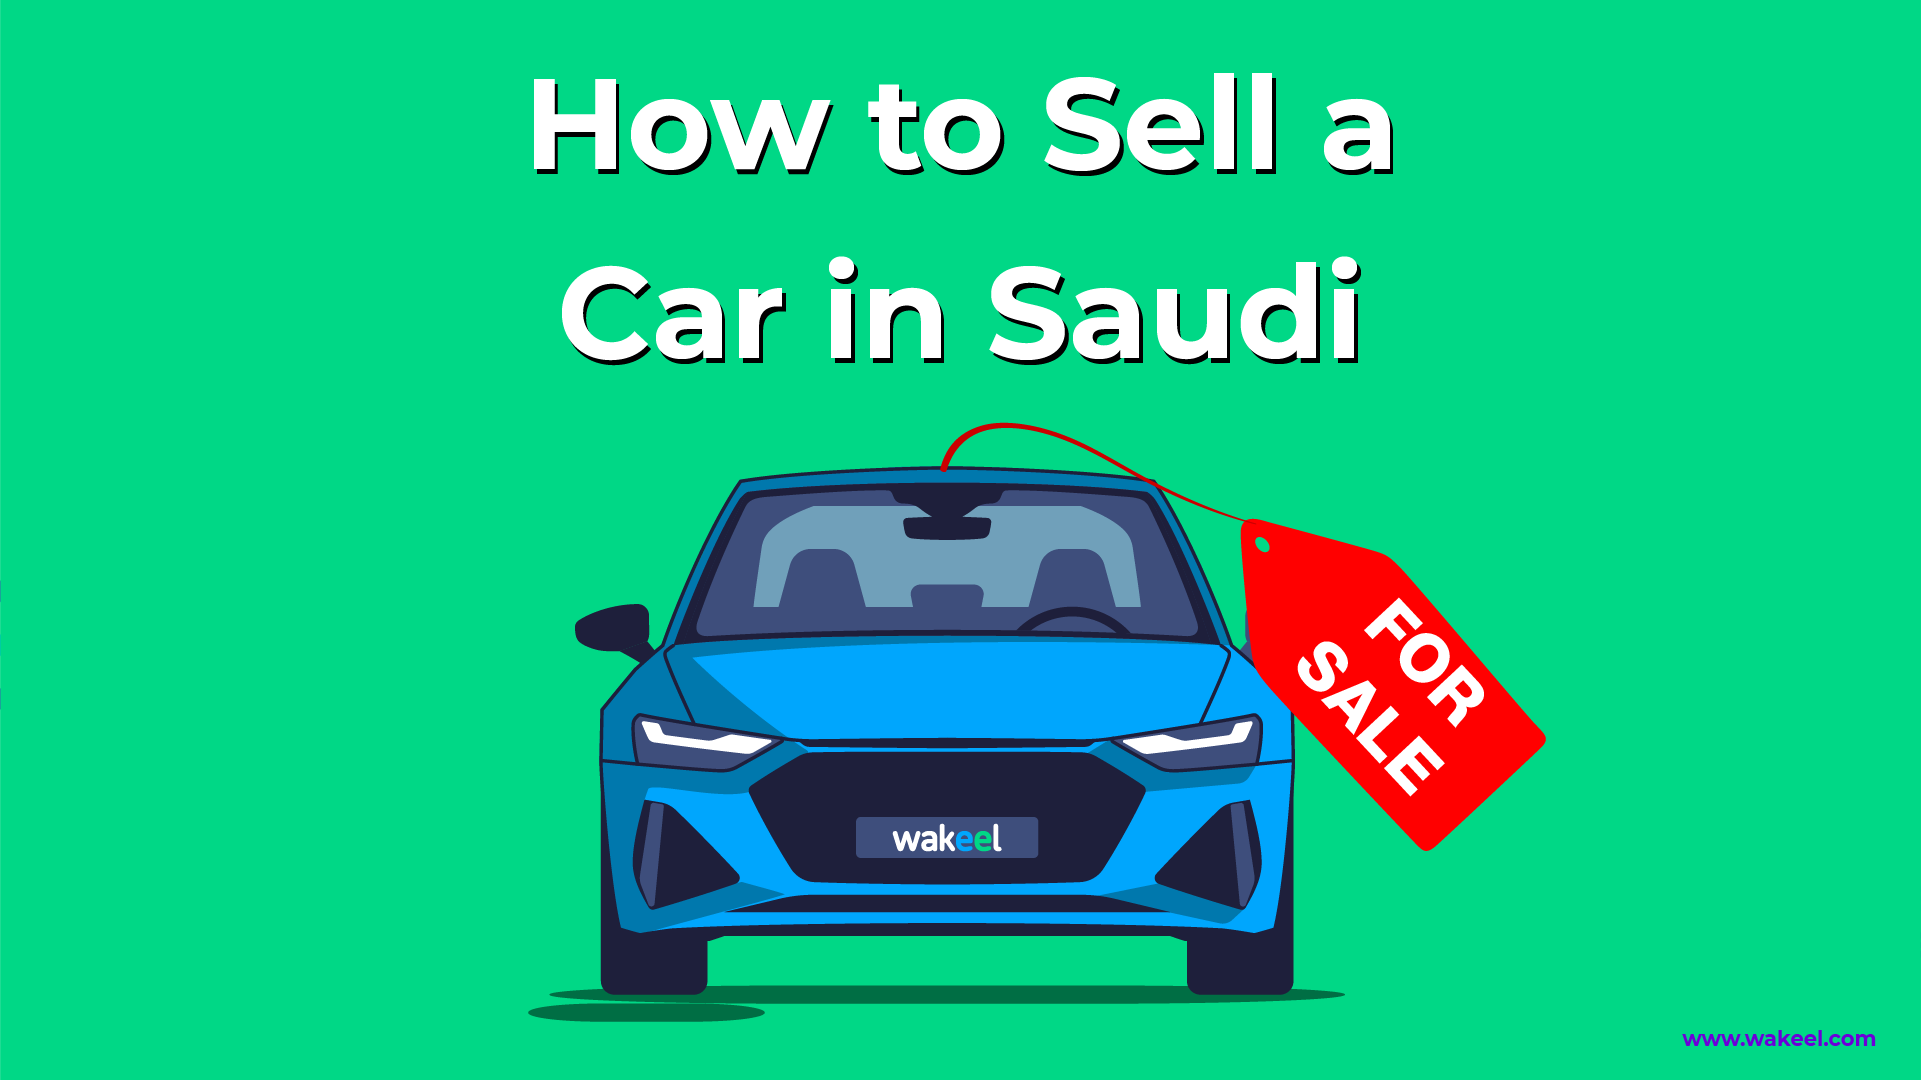 How to Sell a Car in Saudi